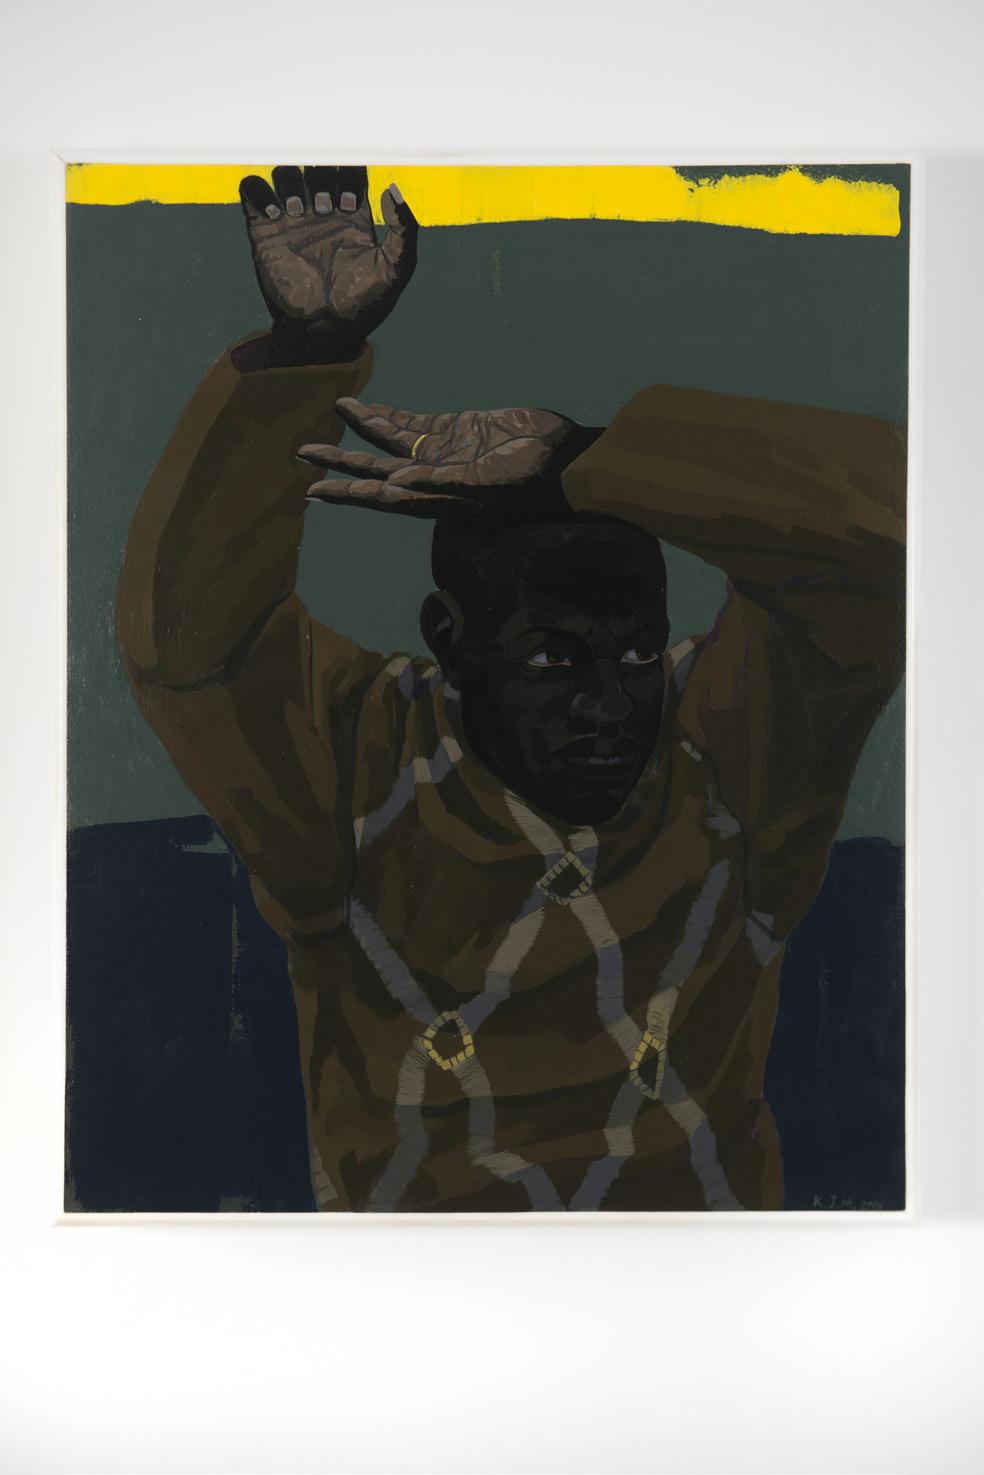 KERRY JAMES MARSHALL Born in 1955 in Birmingham, USA. Lives and works in Chicago, USA.